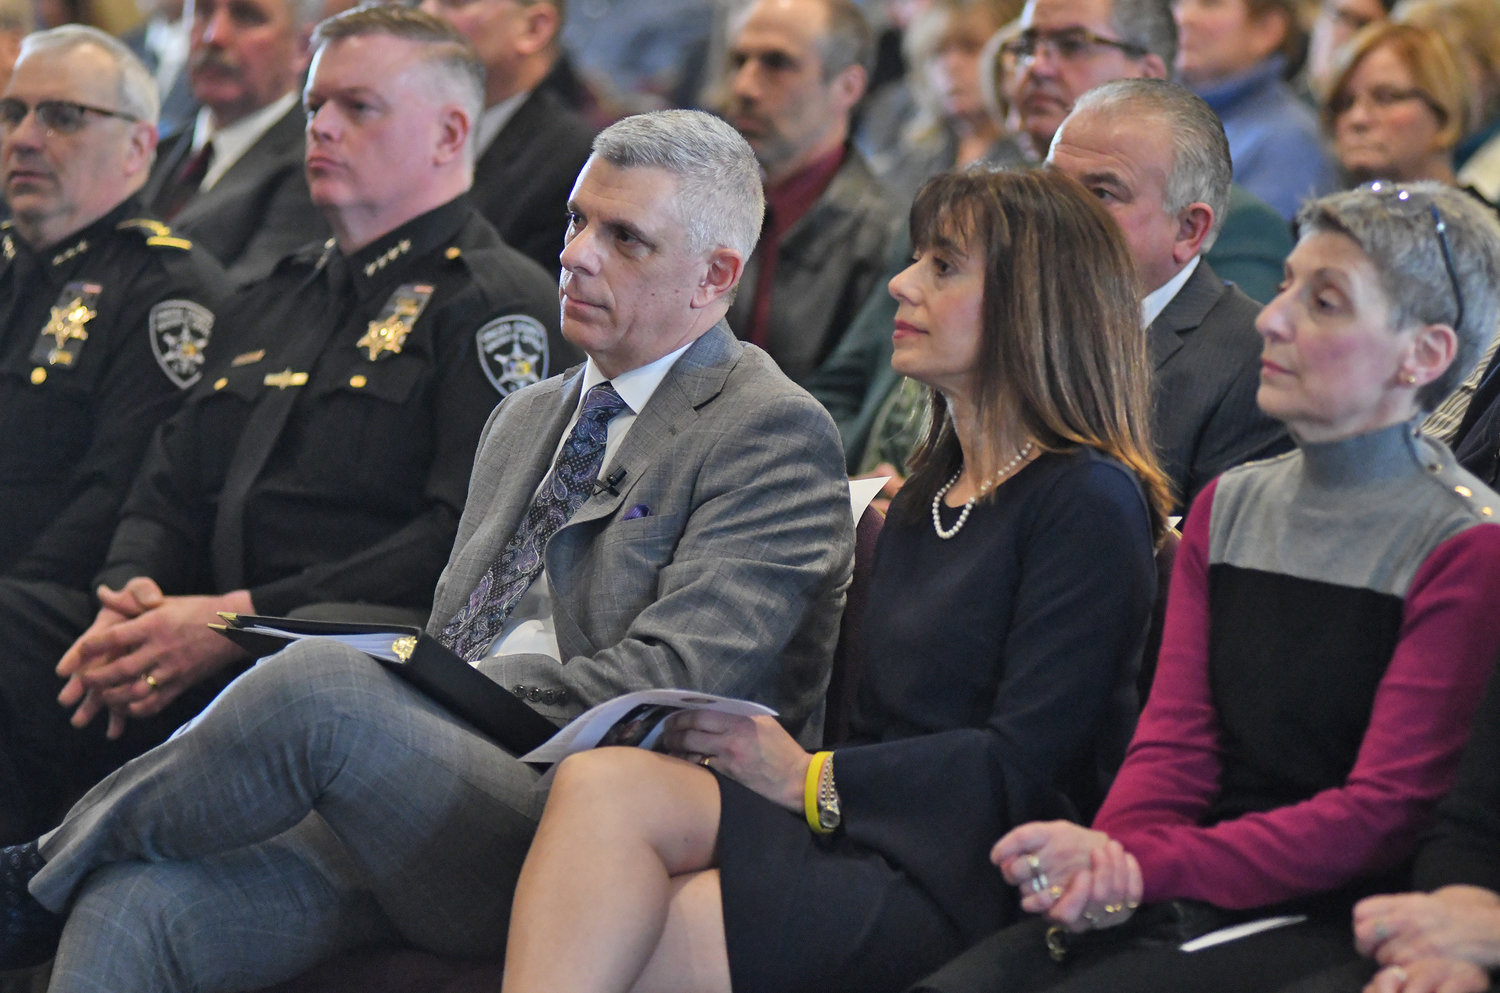 County executive Anthony Picente during his state of the county speech Tuesday afternoon. His wife Eleanor is to his left one of of his sisters.